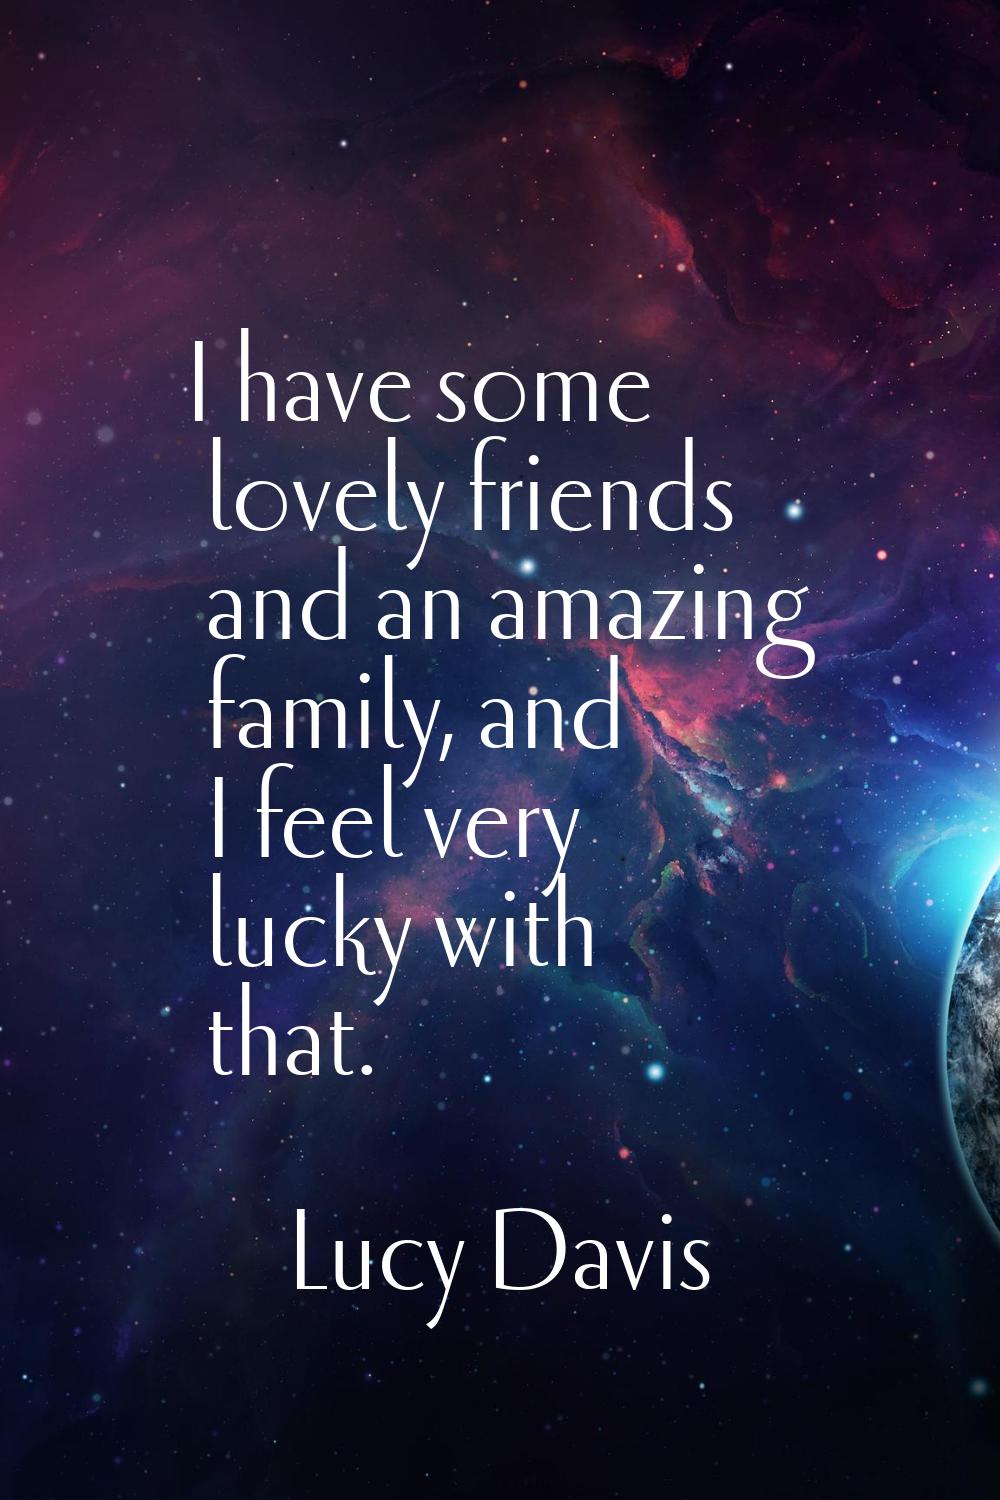 I have some lovely friends and an amazing family, and I feel very lucky with that.